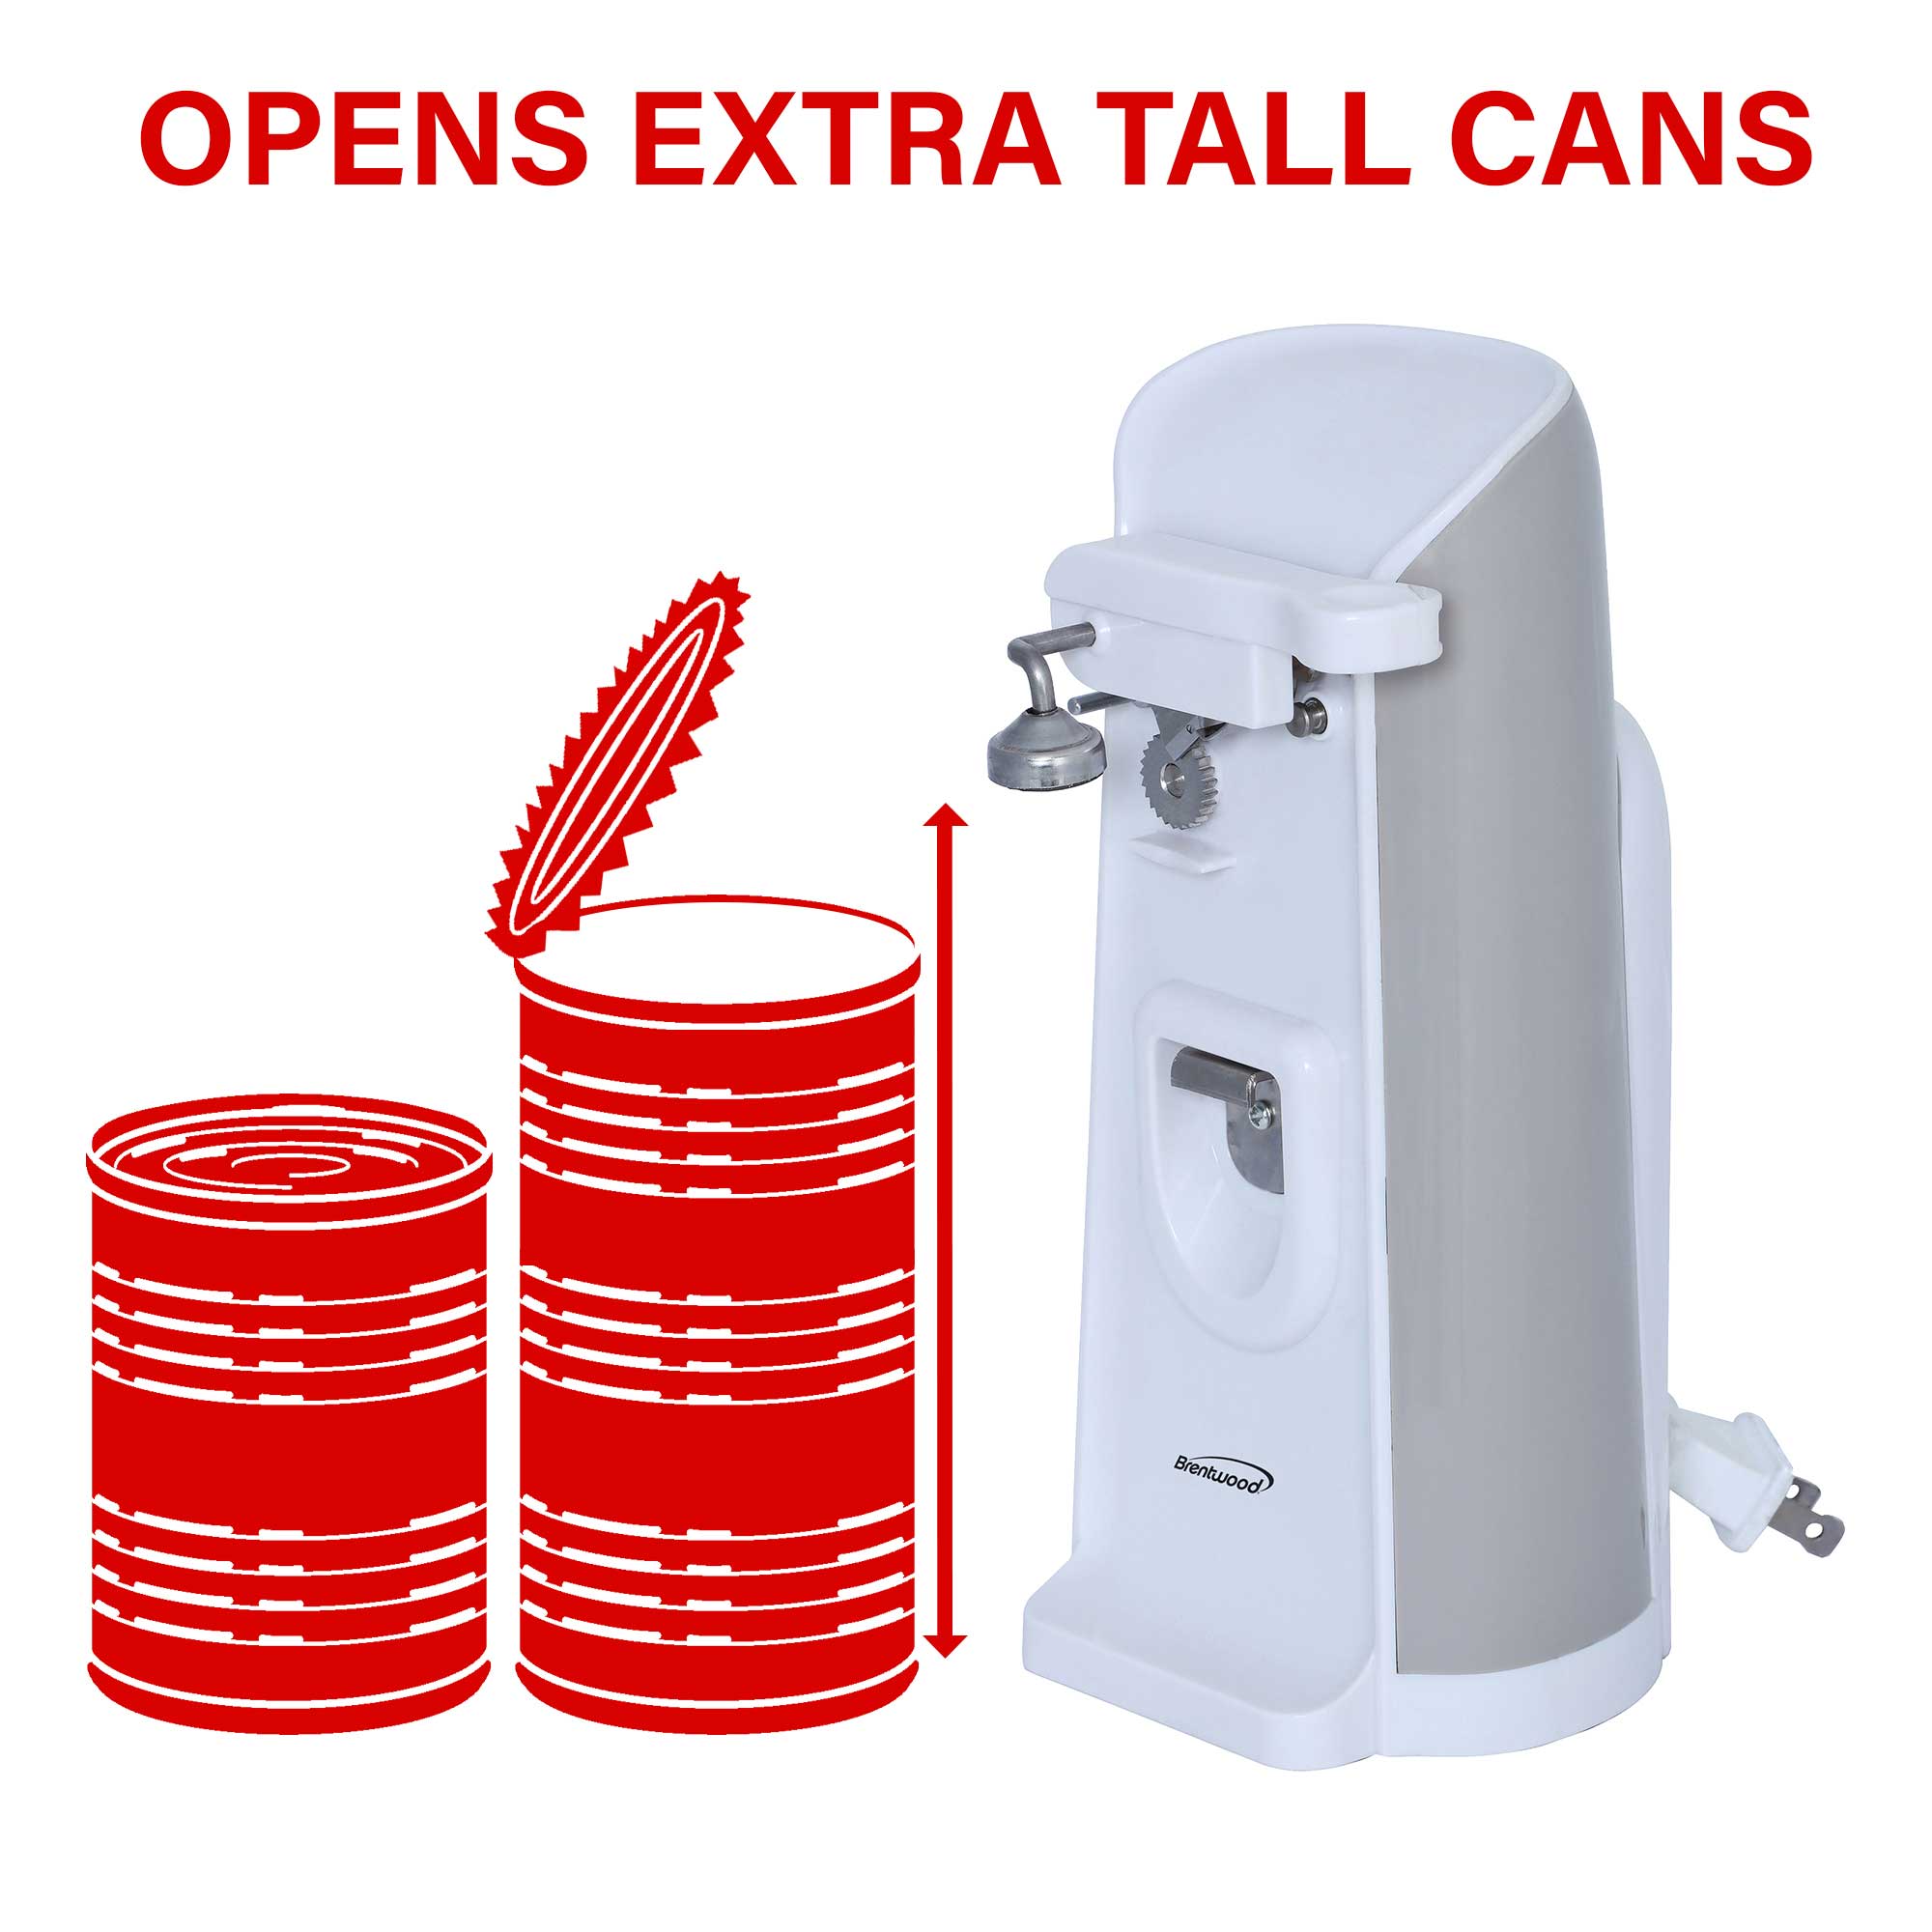 How to use an electric can opener - Reviewed